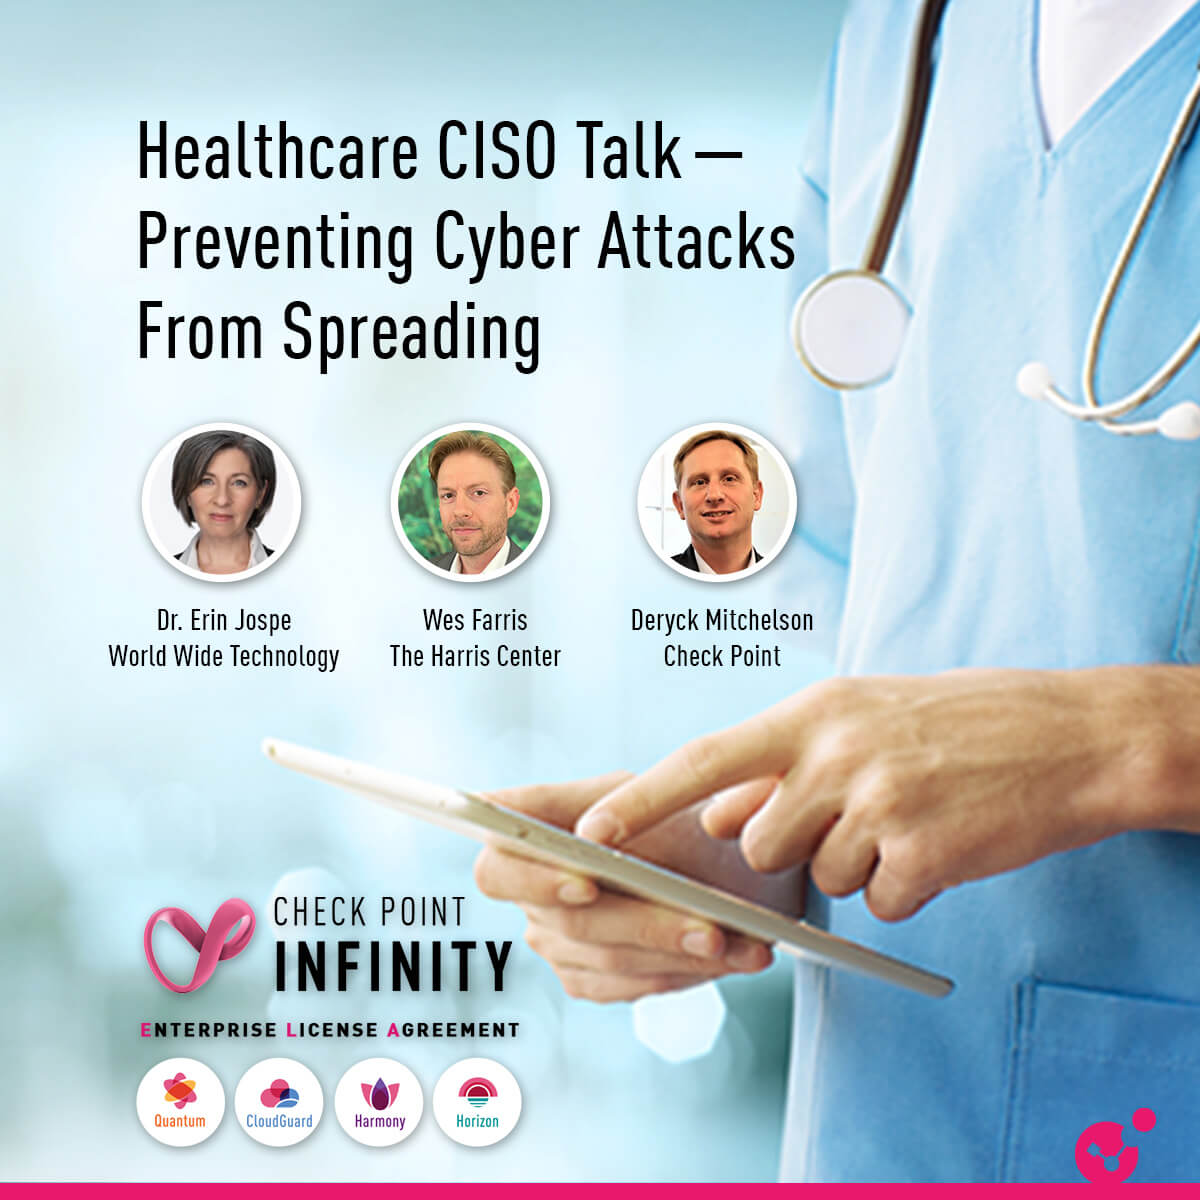 Is there a way for healthcare providers to prevent cyber-attacks from spreading?